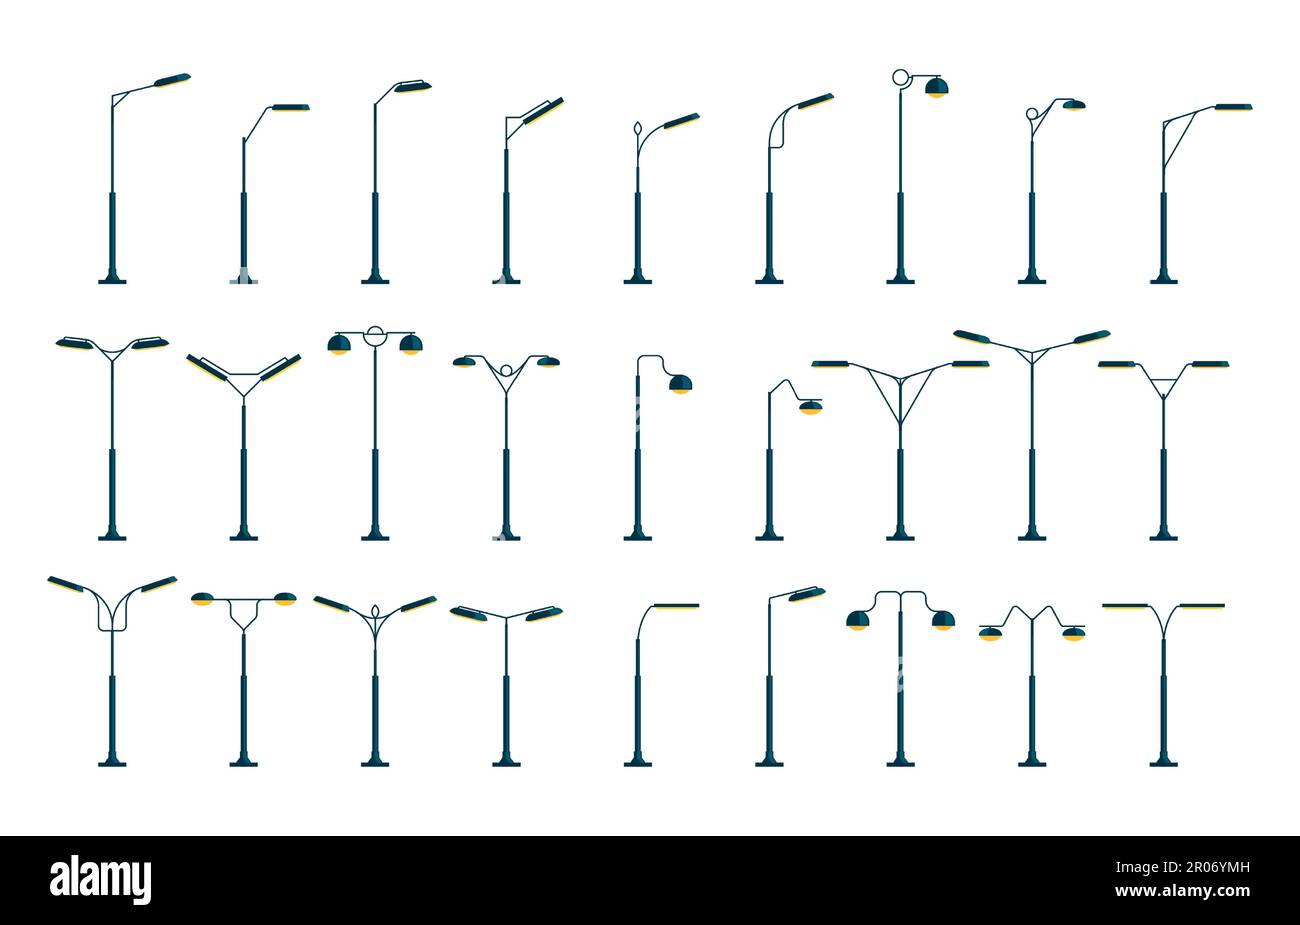 City light pole. Modern urban street lamp post, cartoon flat lamps outdoor architectural accessories. Vector street lights isolated set. Electrical spotlight, outside sidewalk elements Stock Vector